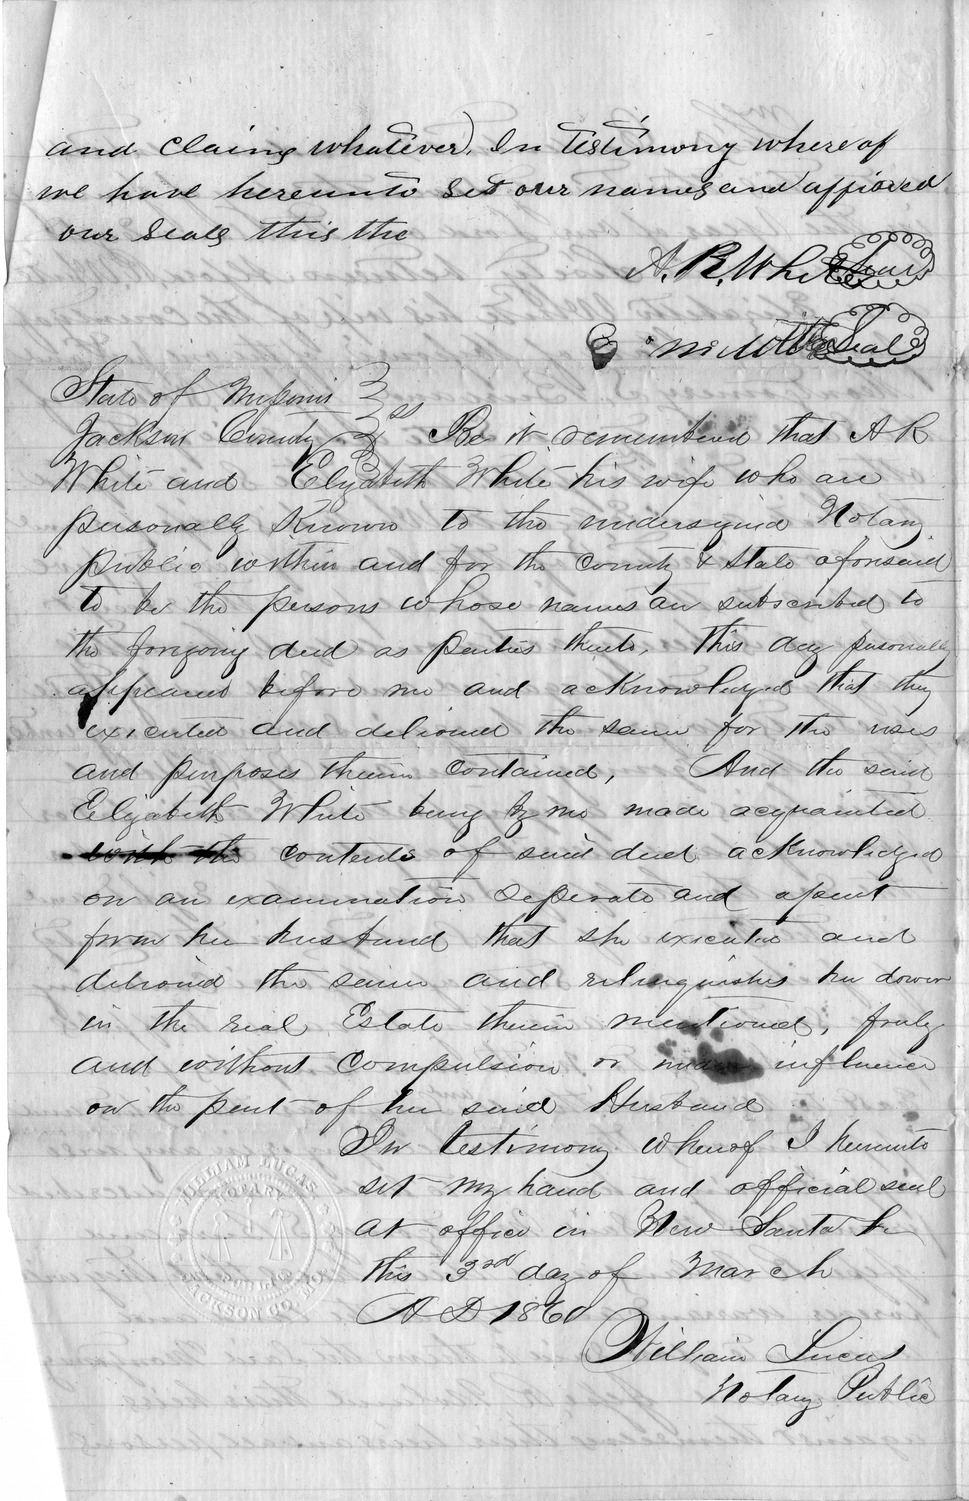 Land Deed from A. R. White to Montgomery S. Burr and Jesse R. Noland